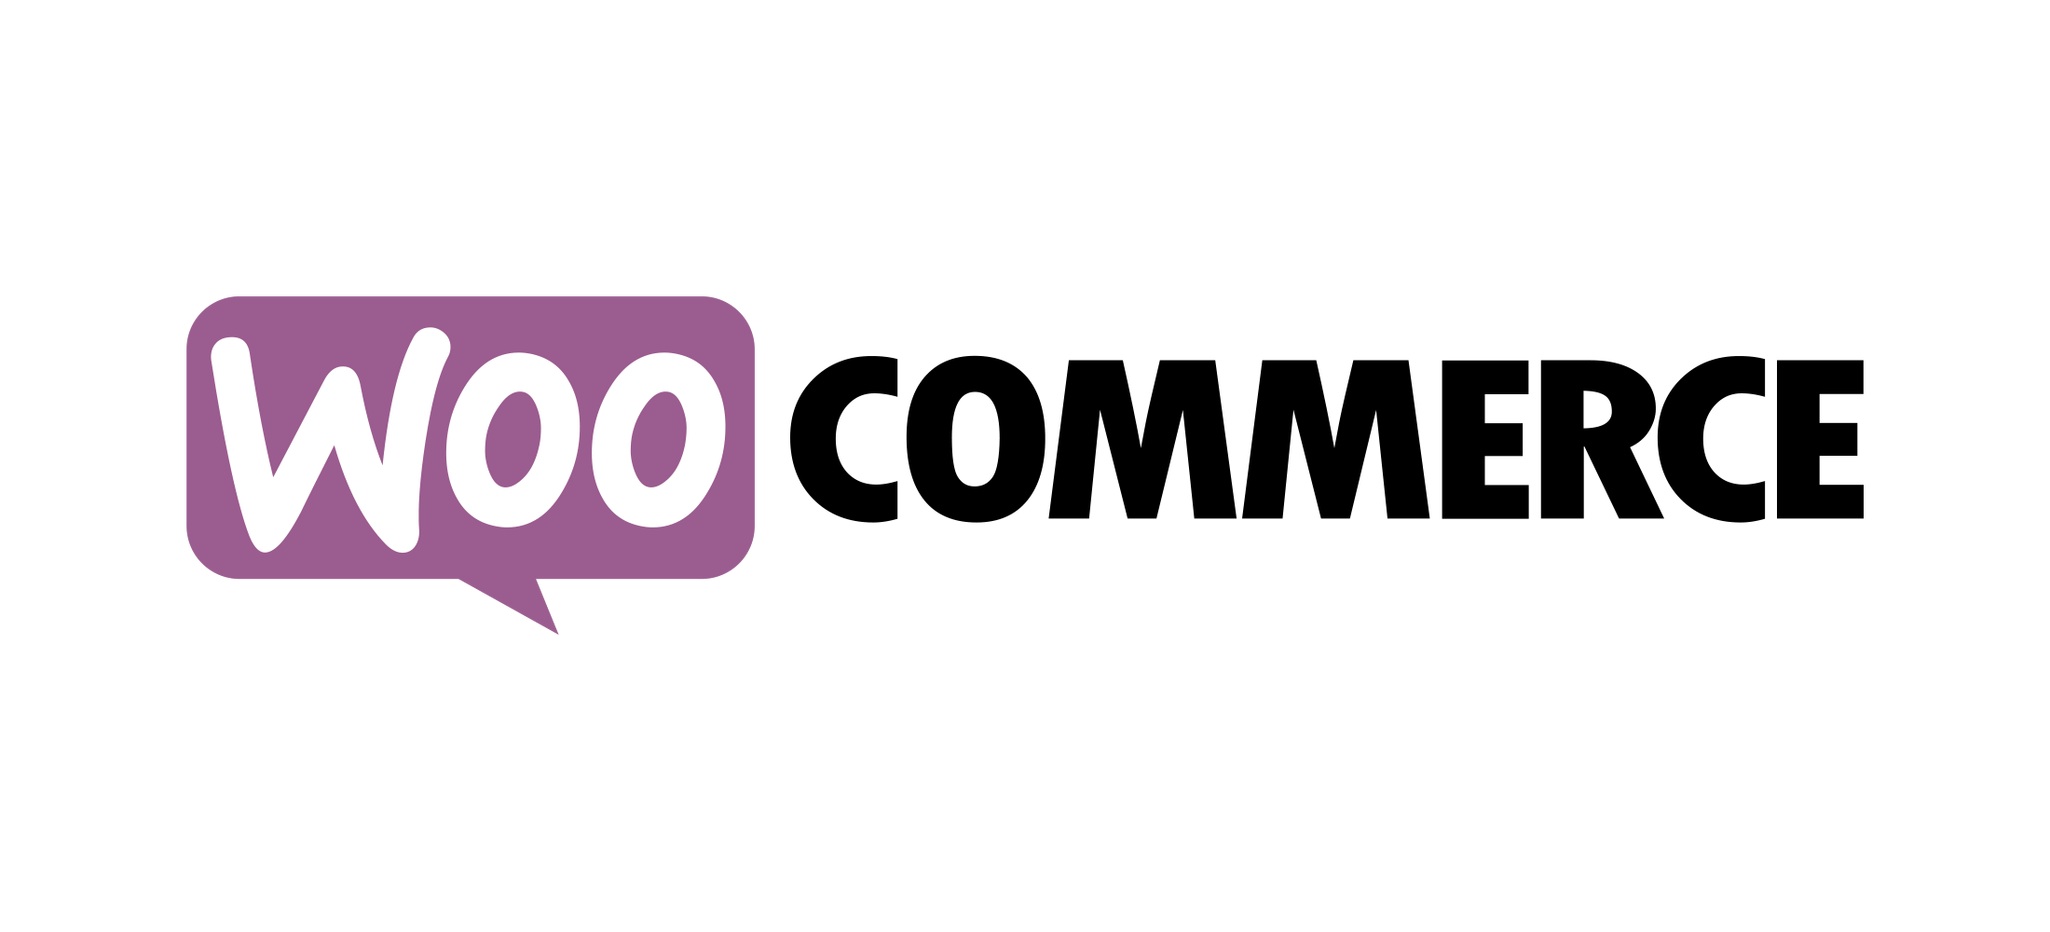 WooCommerce 4.6 Makes New Home Screen the Default for New and Existing Stores